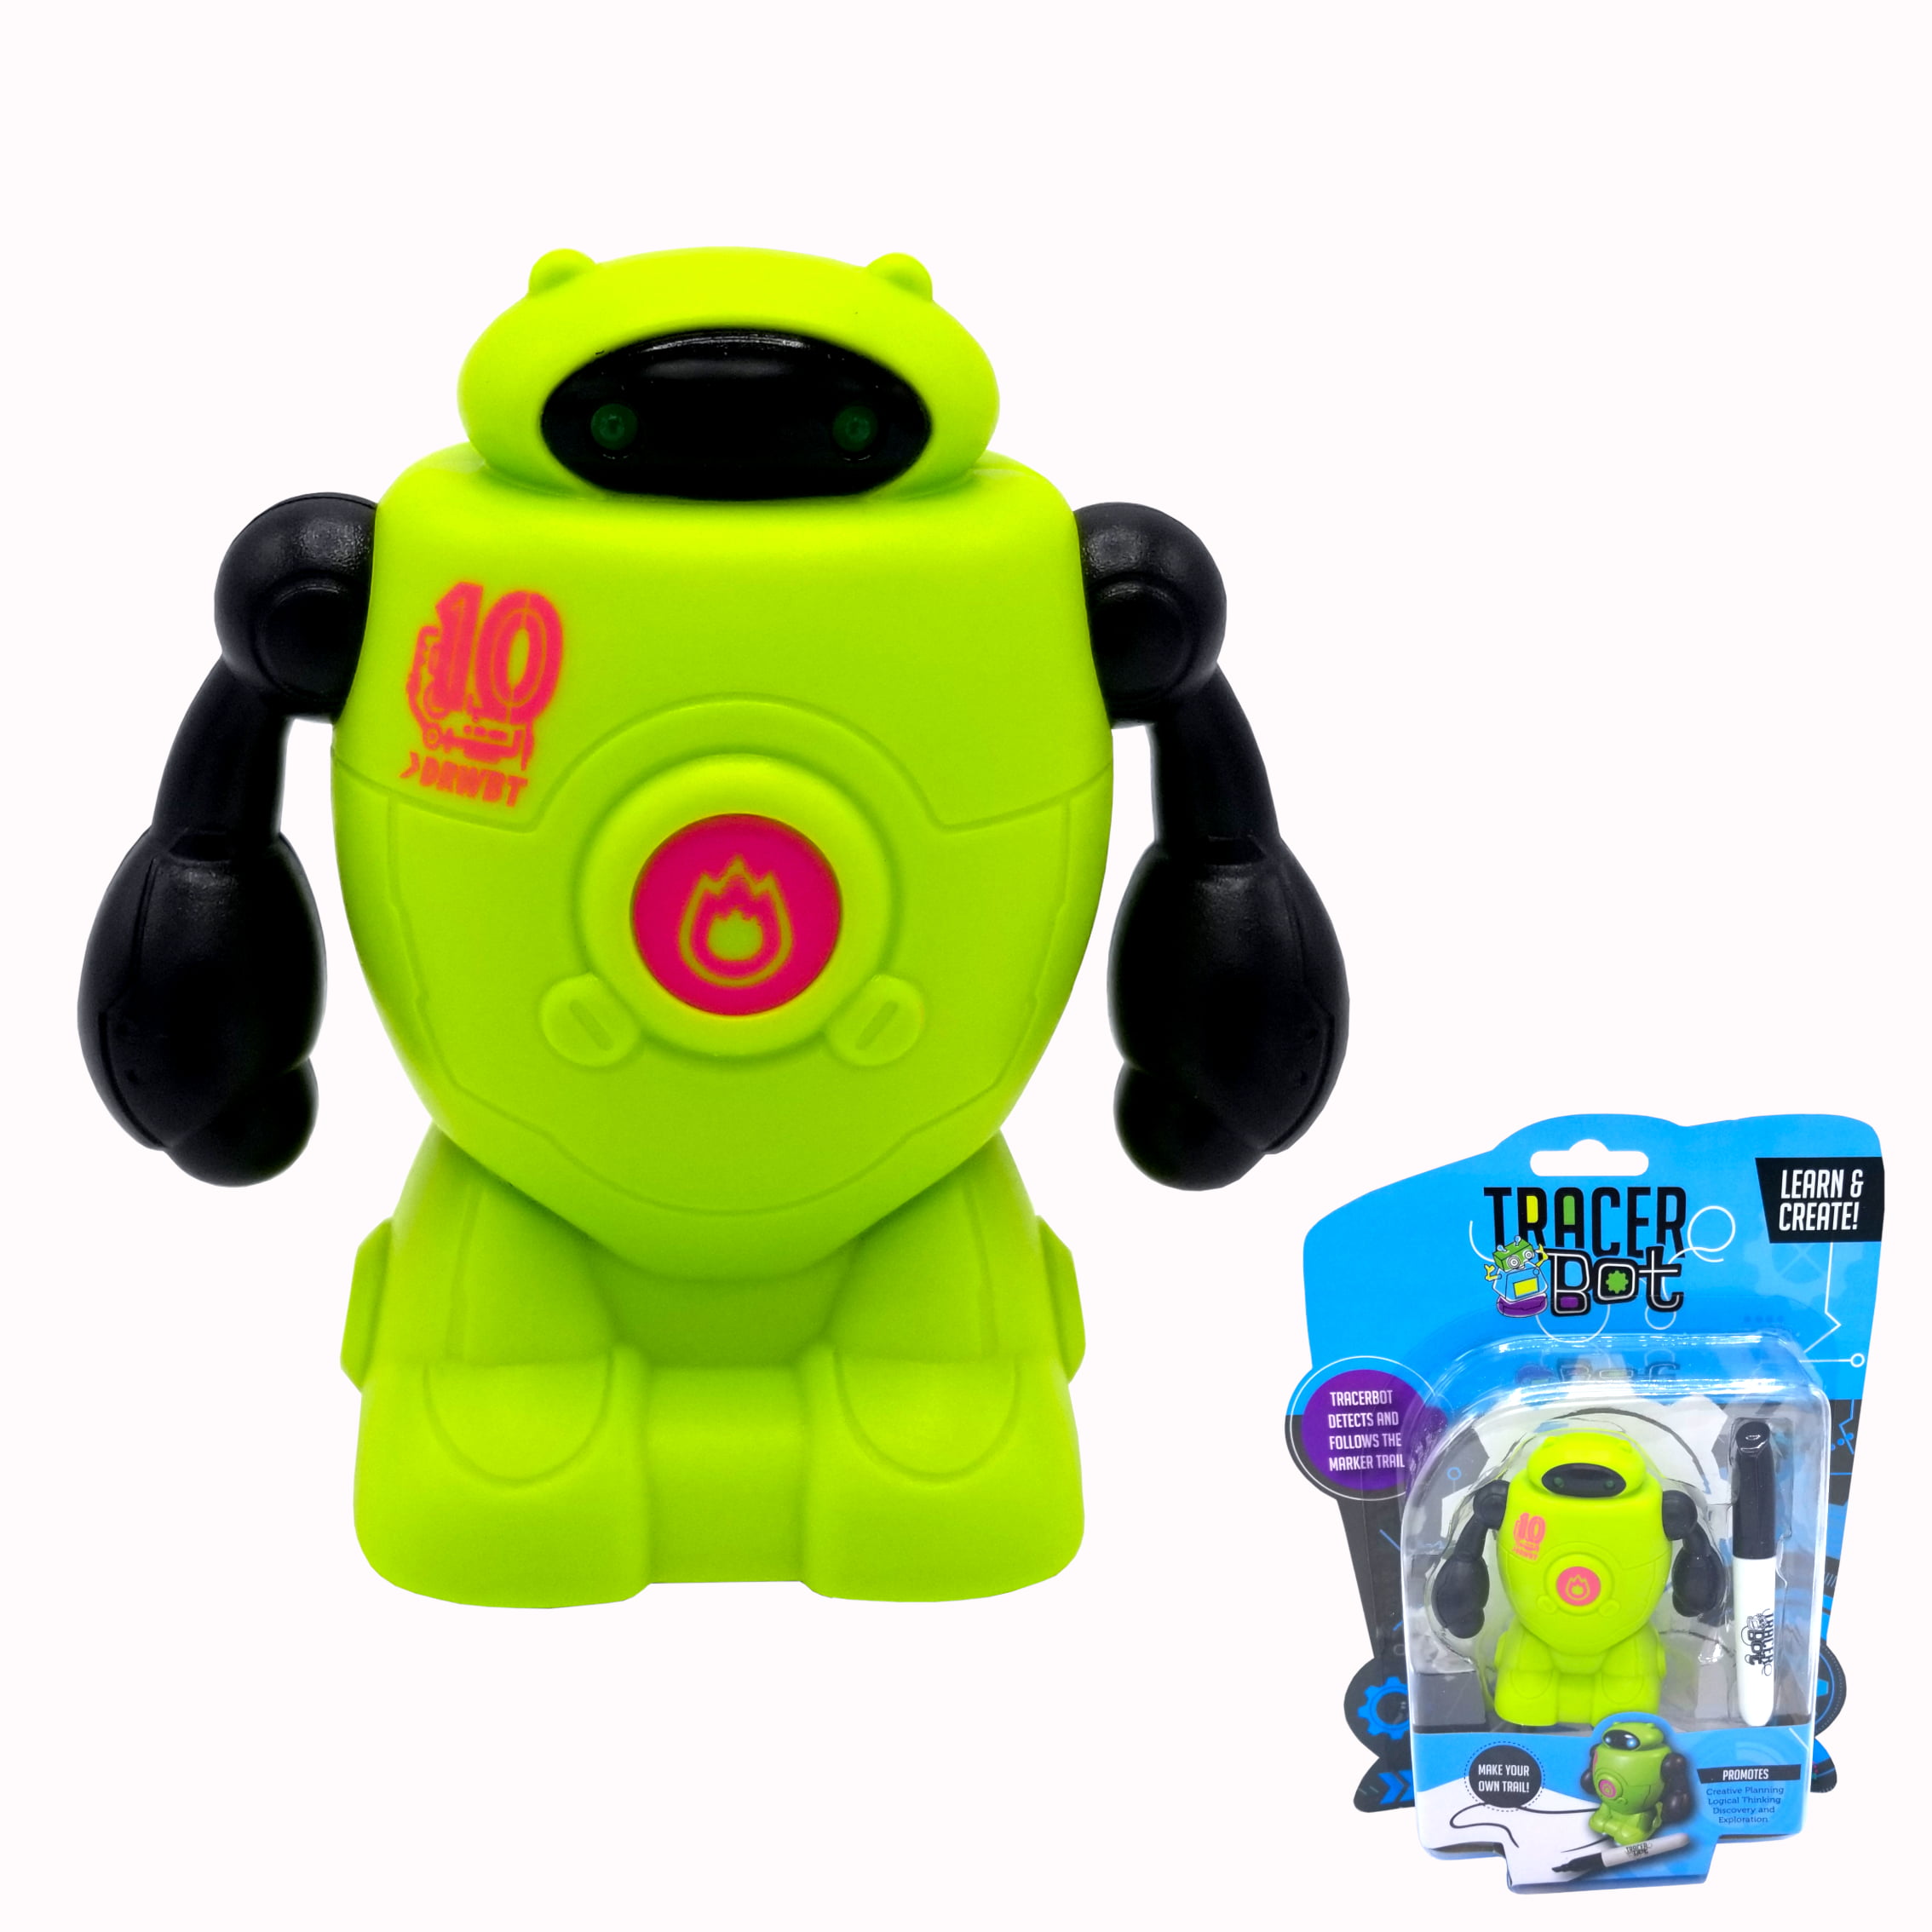 Tracerbot Green Mini Inductive Robot That Follows the Black Line You Draw 